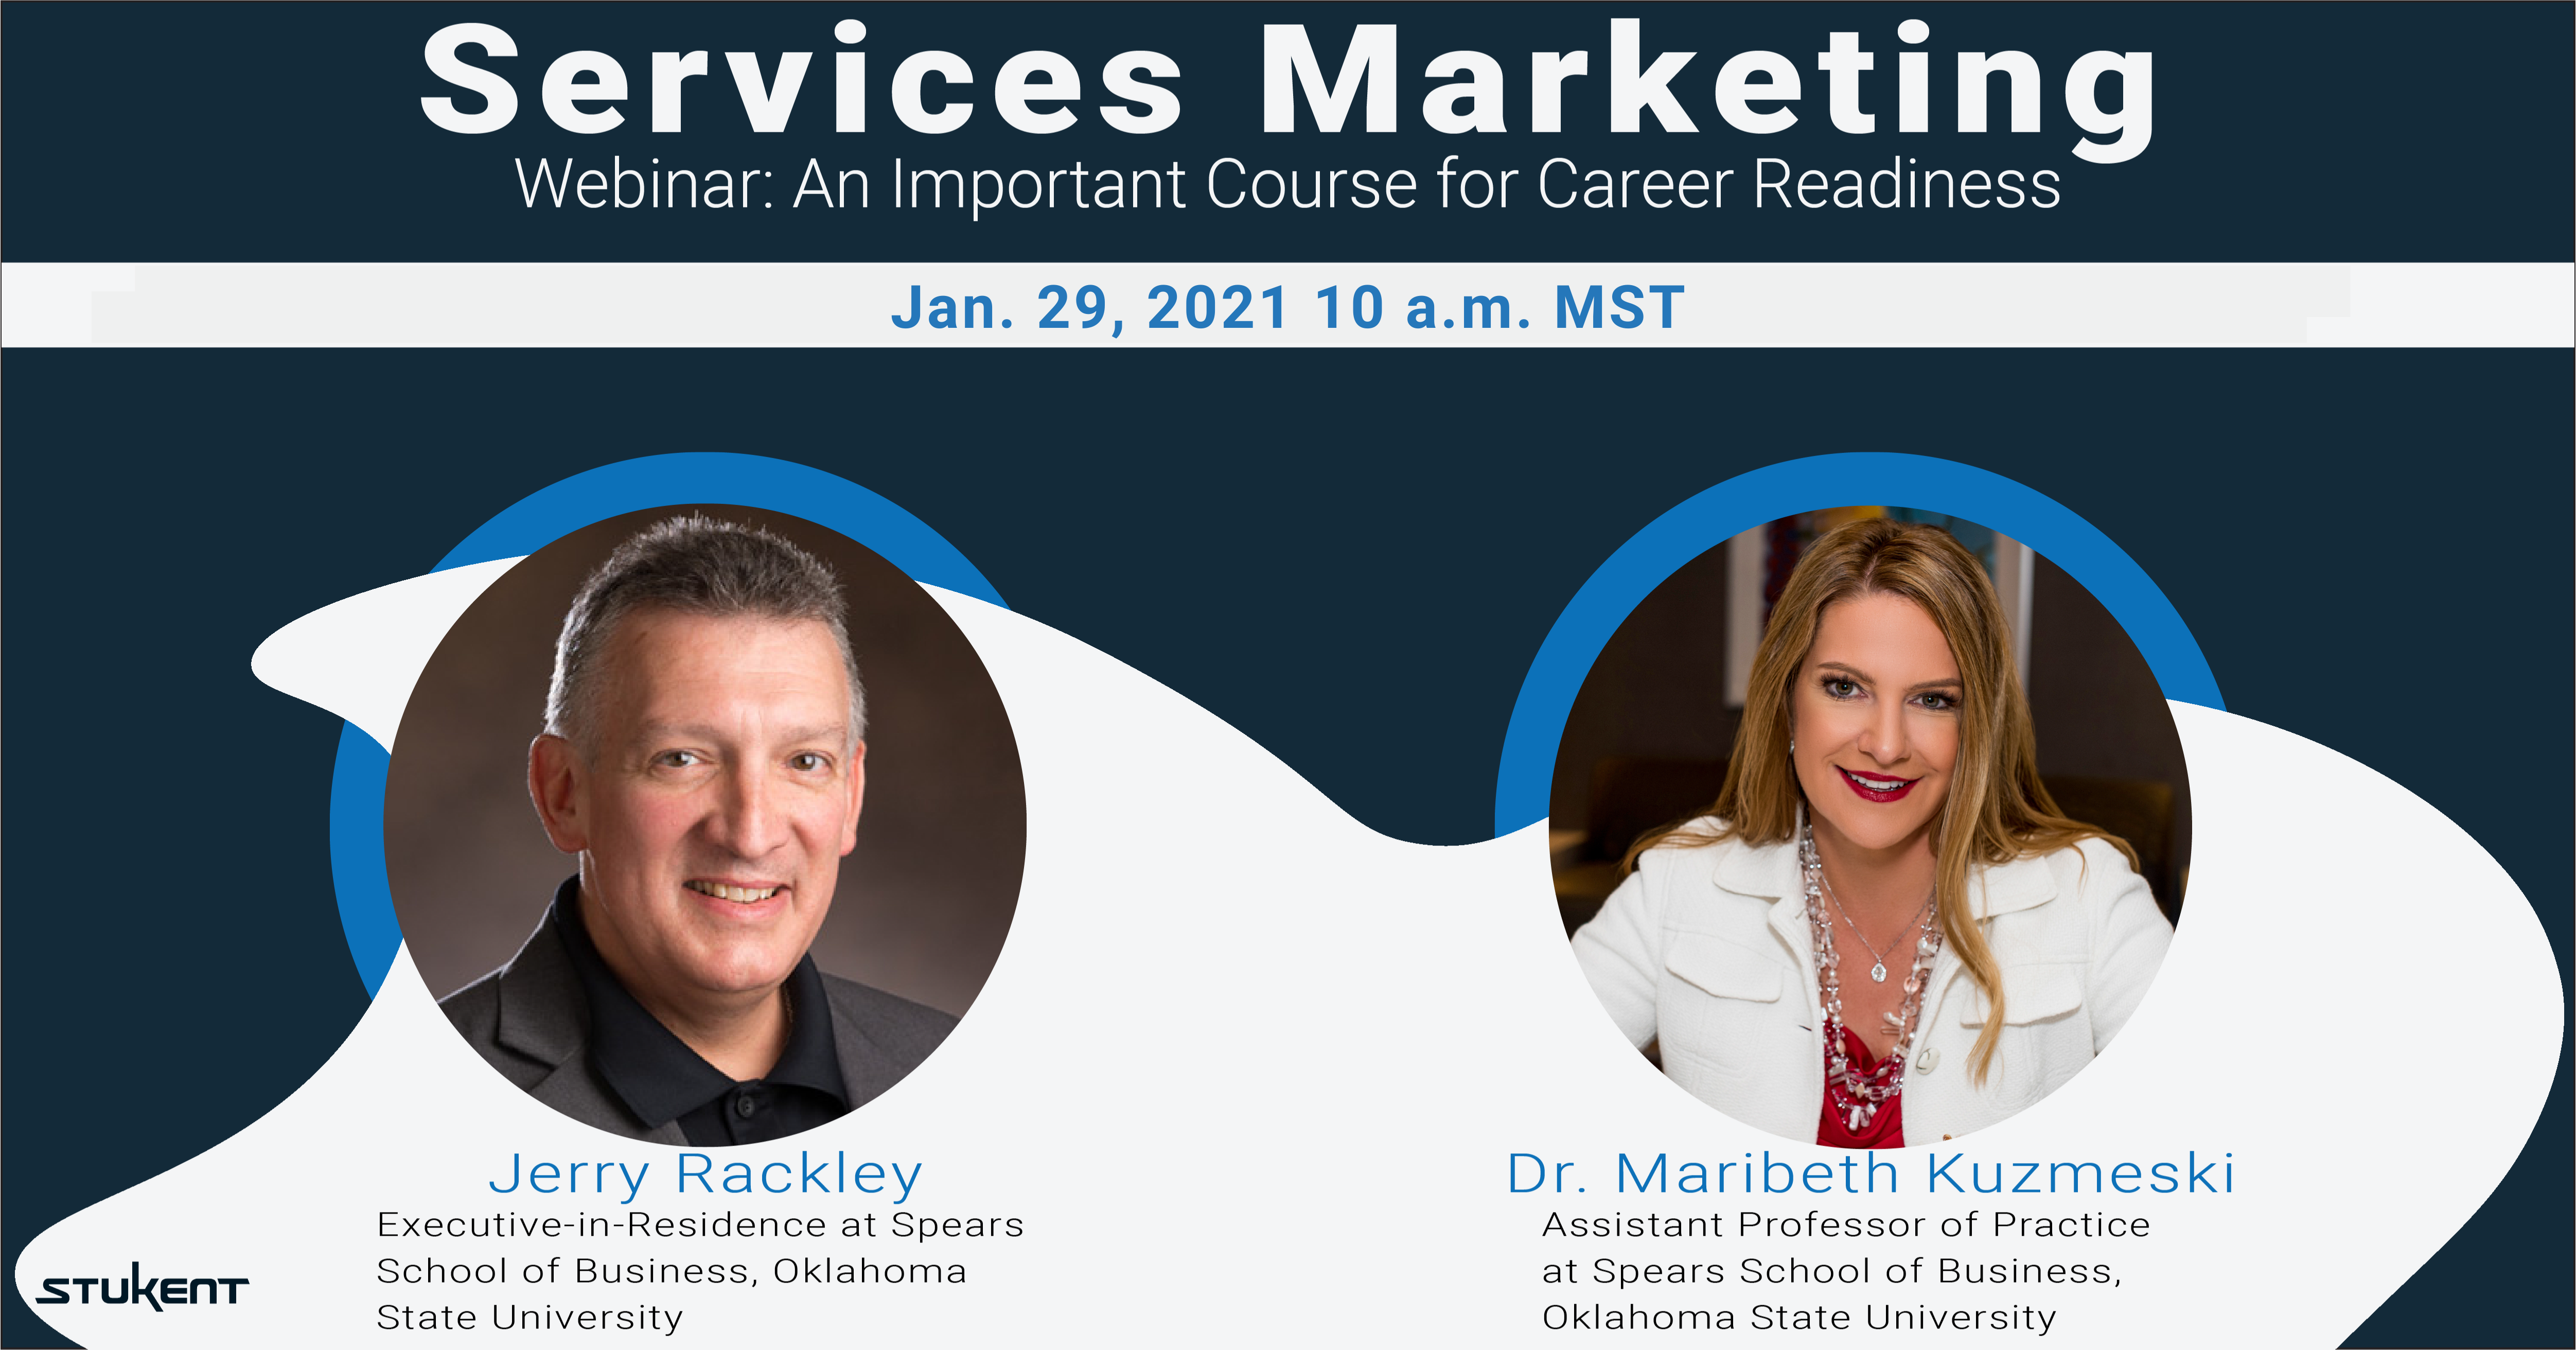 Services Marketing: An Important Course for Career Readiness